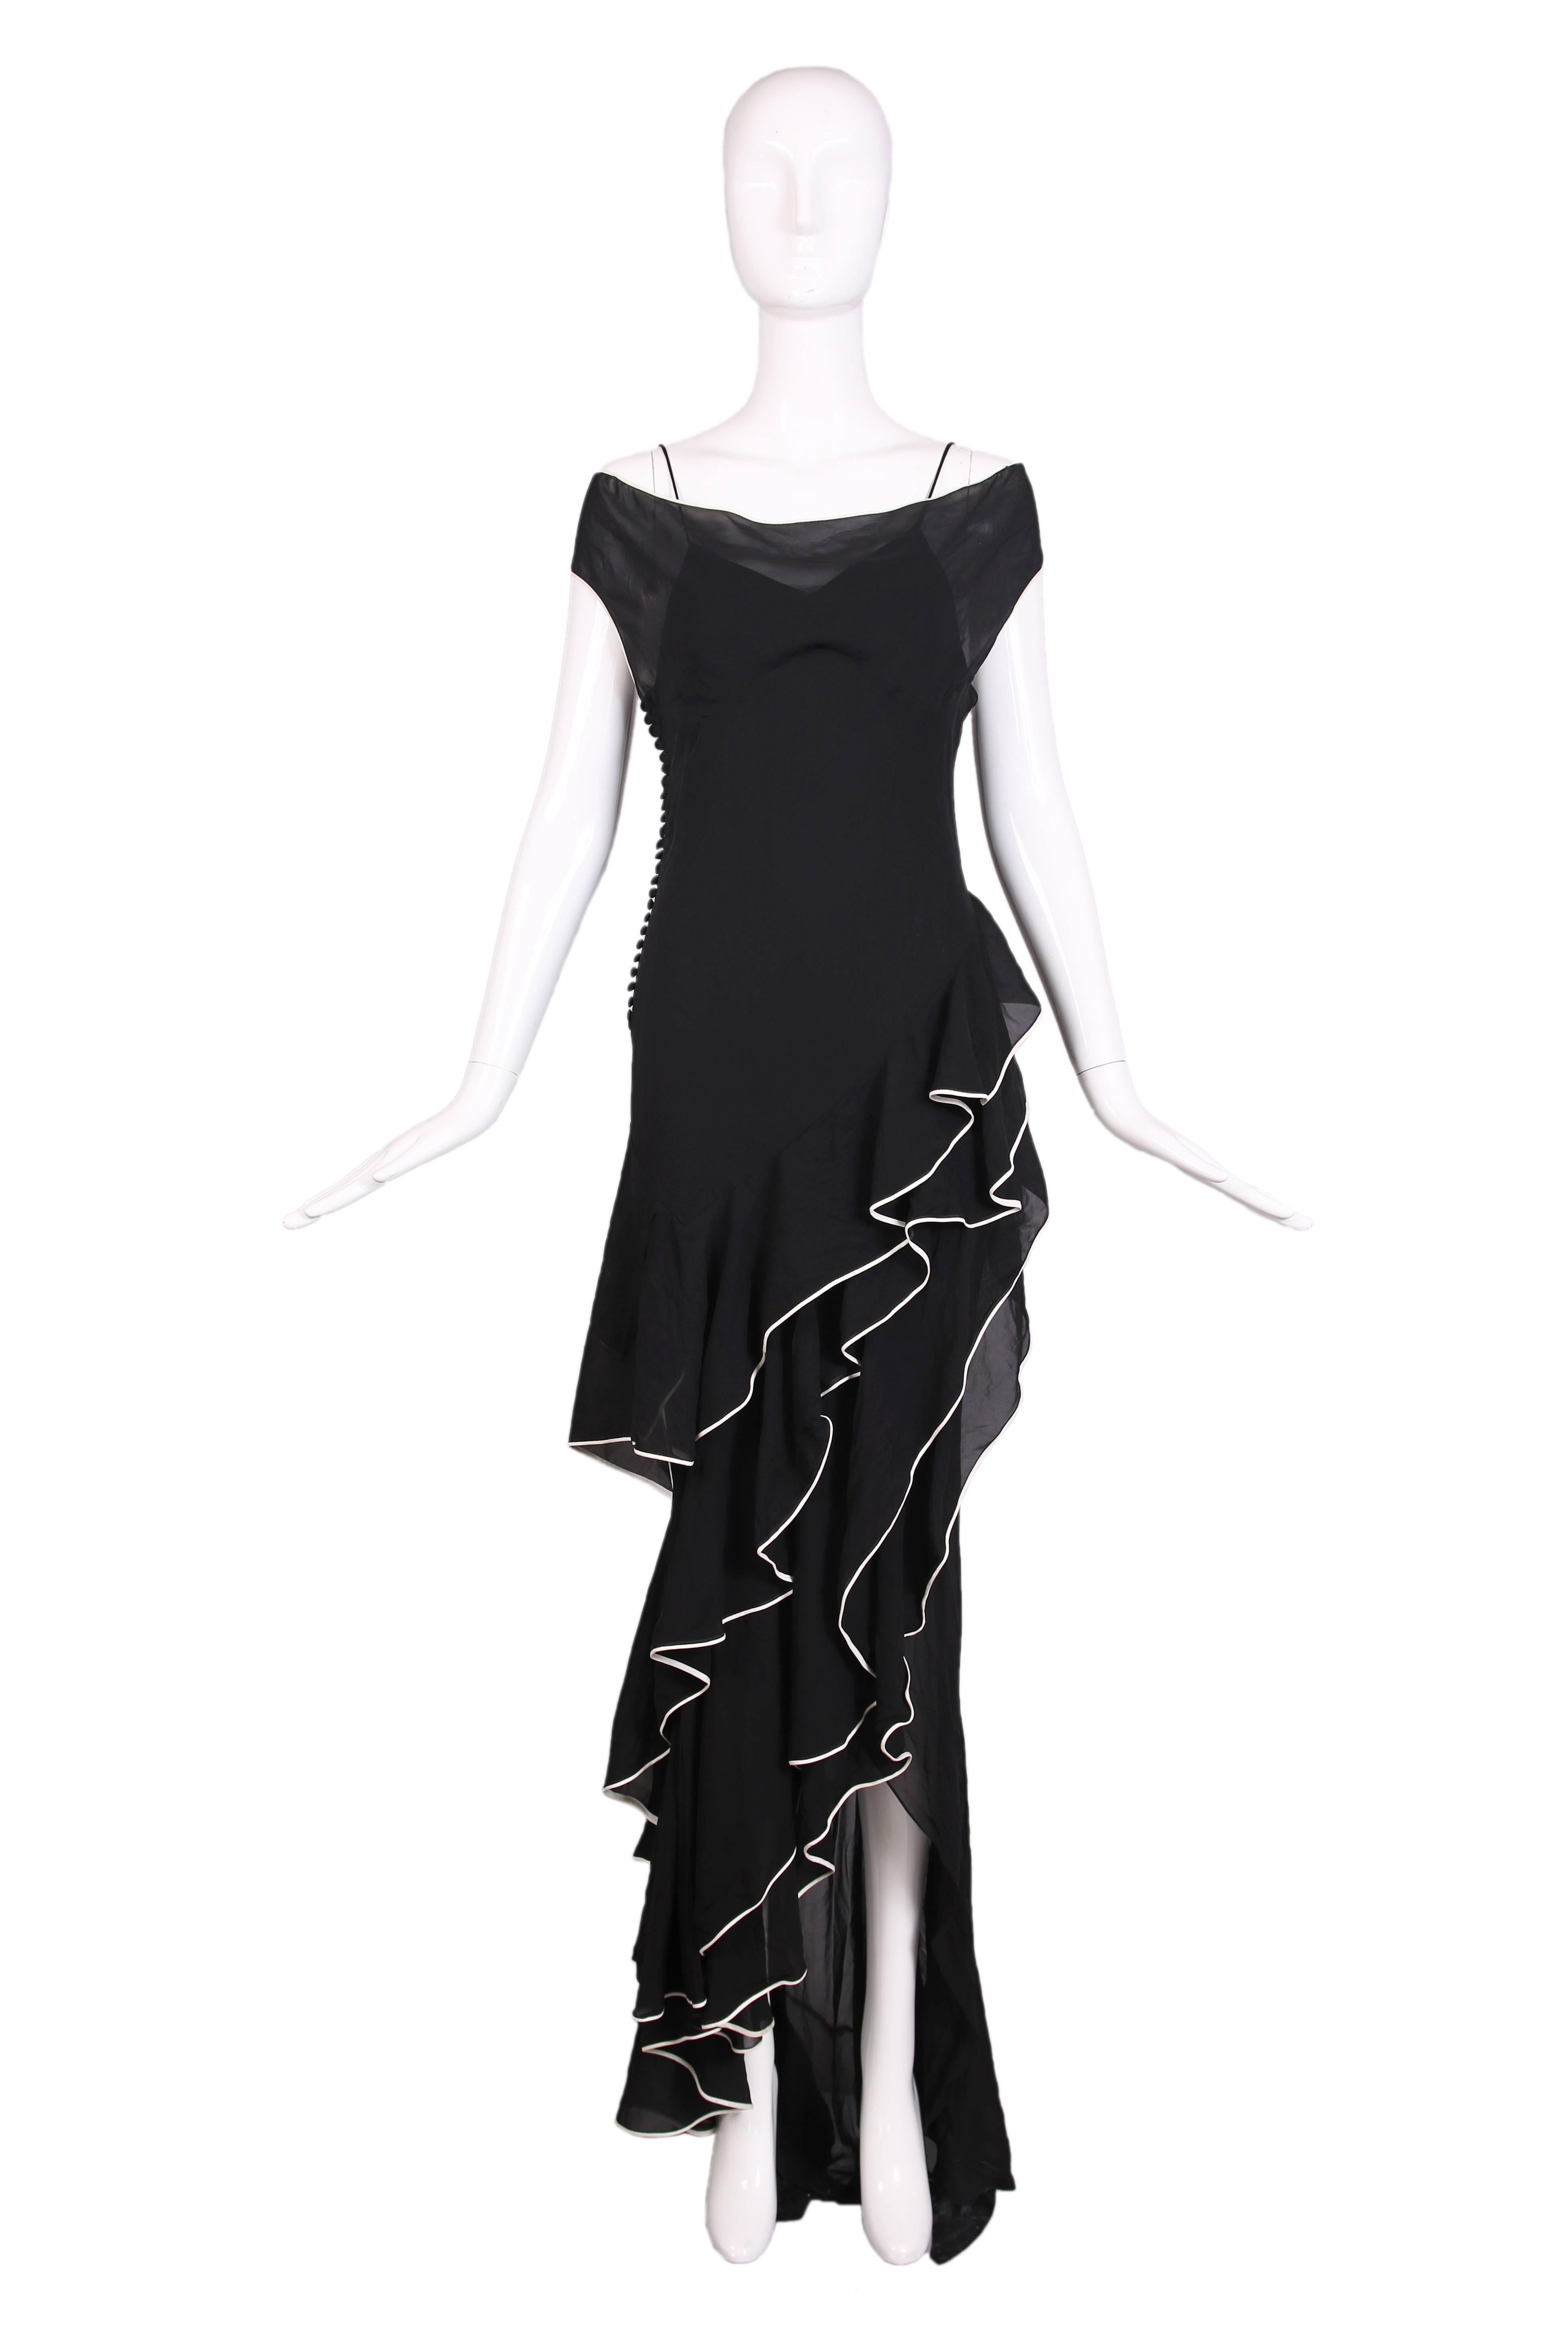 2005 Christian Dior by Galliano Black Silk Chiffon Bias-cut Ruffle Evening Gown In Excellent Condition In Studio City, CA